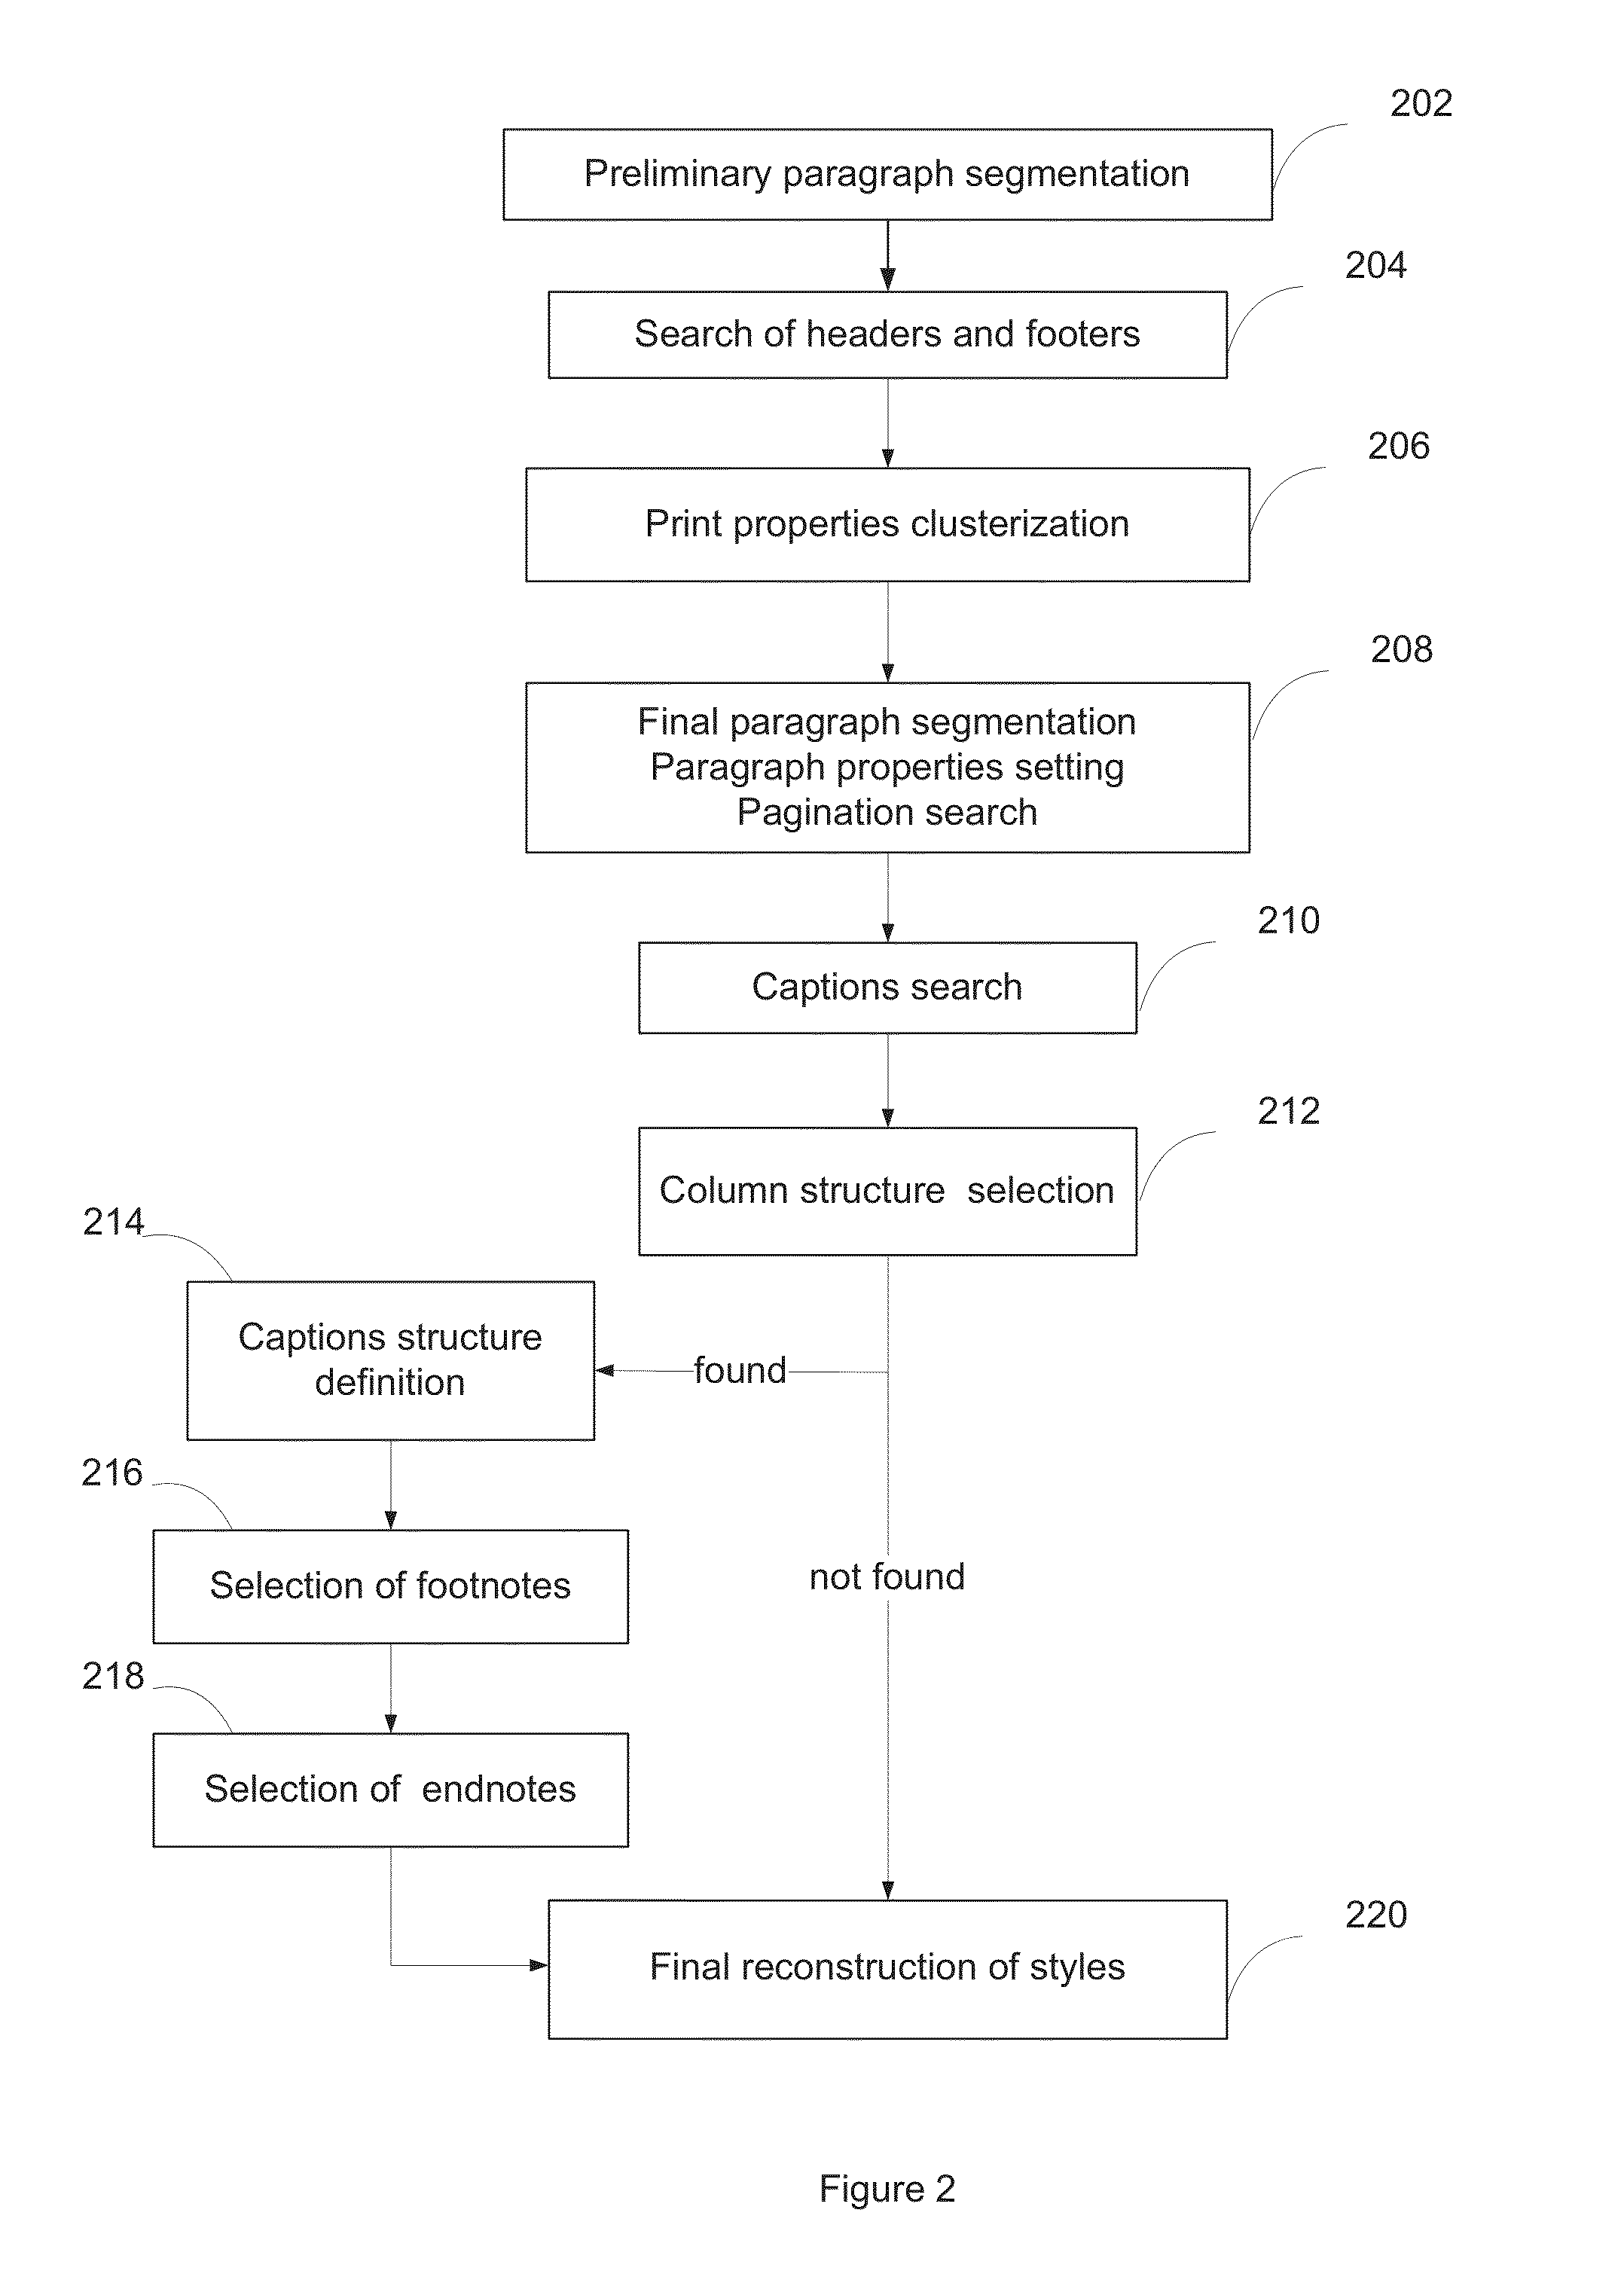 Model-based methods of document logical structure recognition in OCR systems